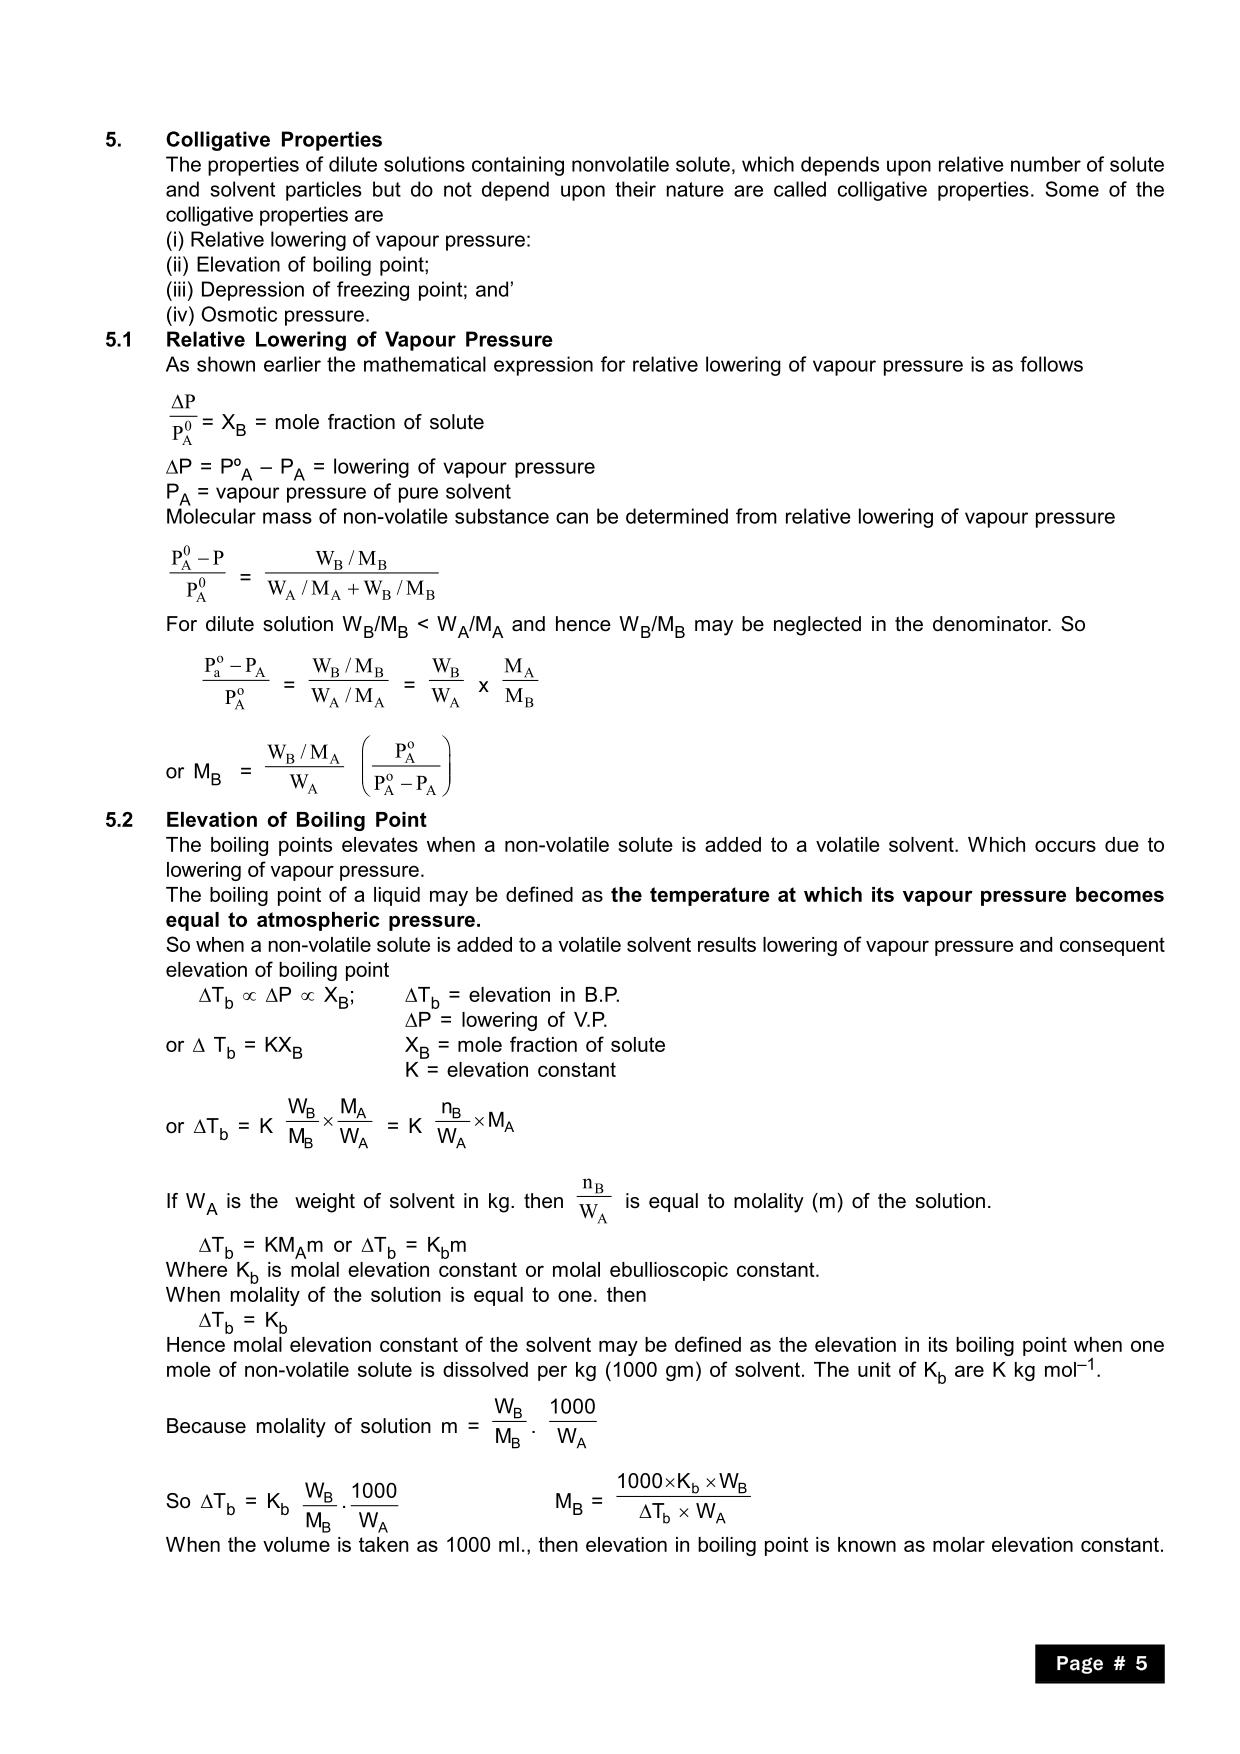 Solutions Chemistry Class 12 notes: Colligative Properties